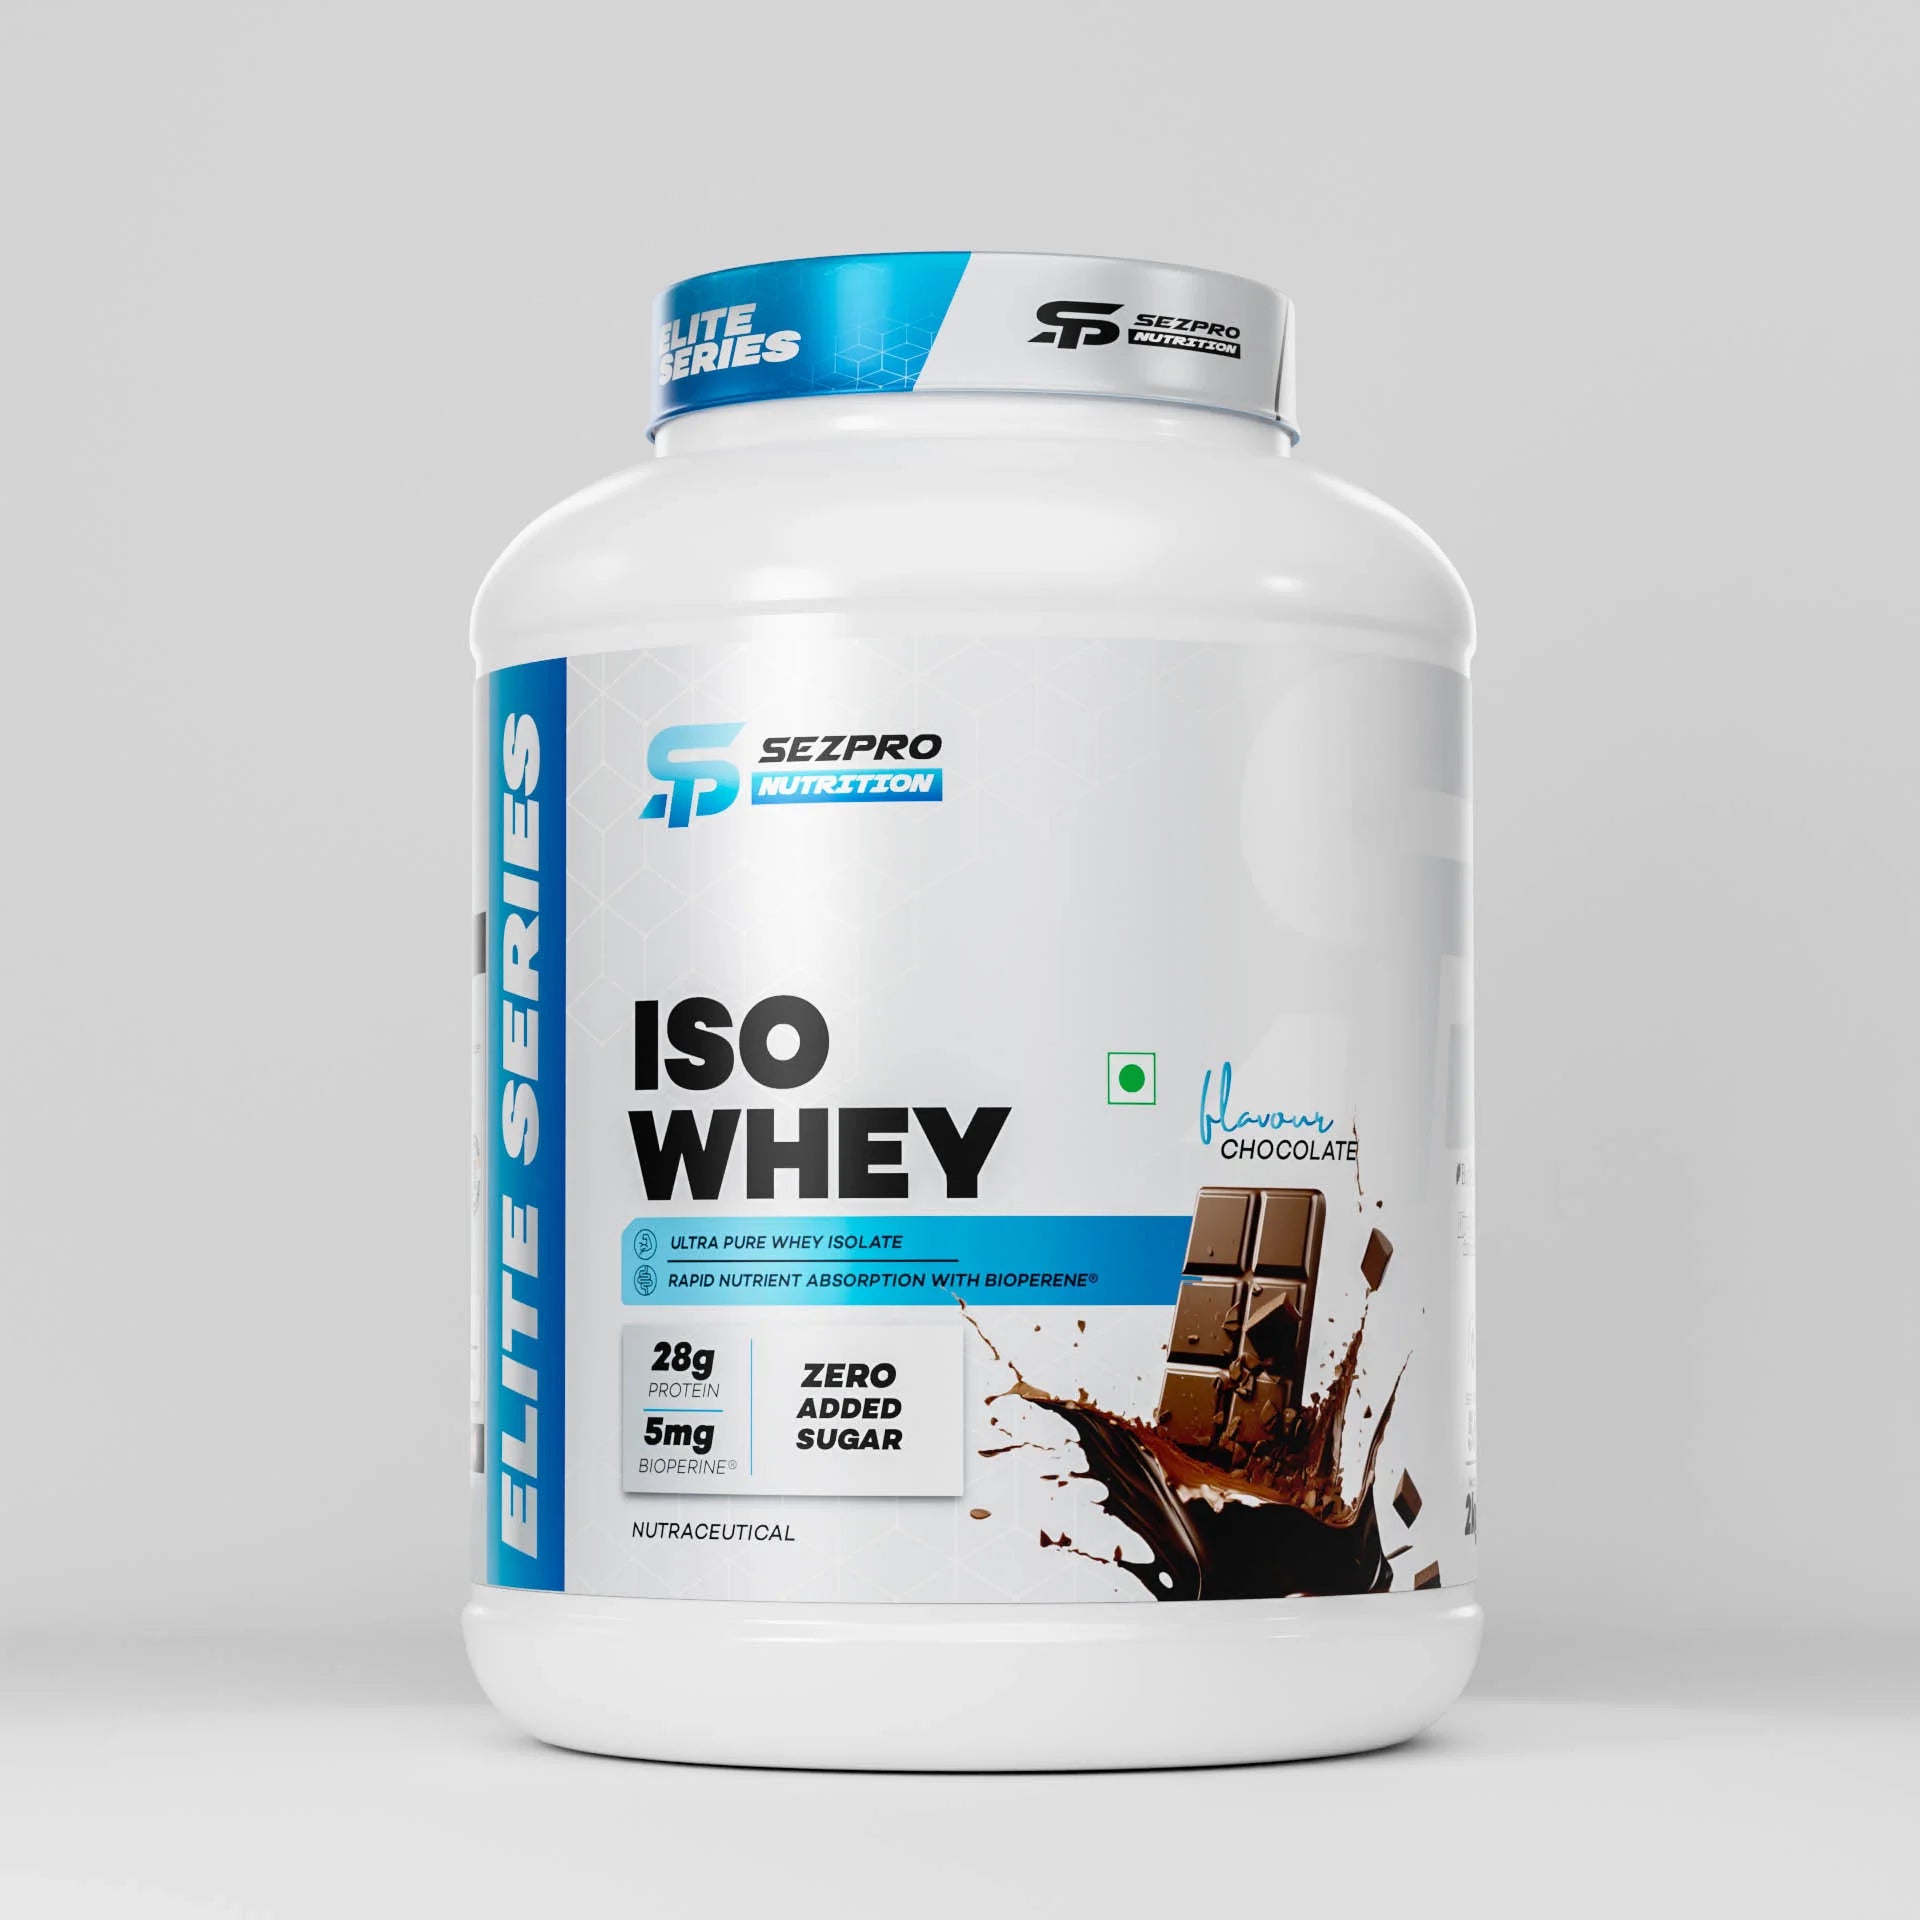 iso 100 protein